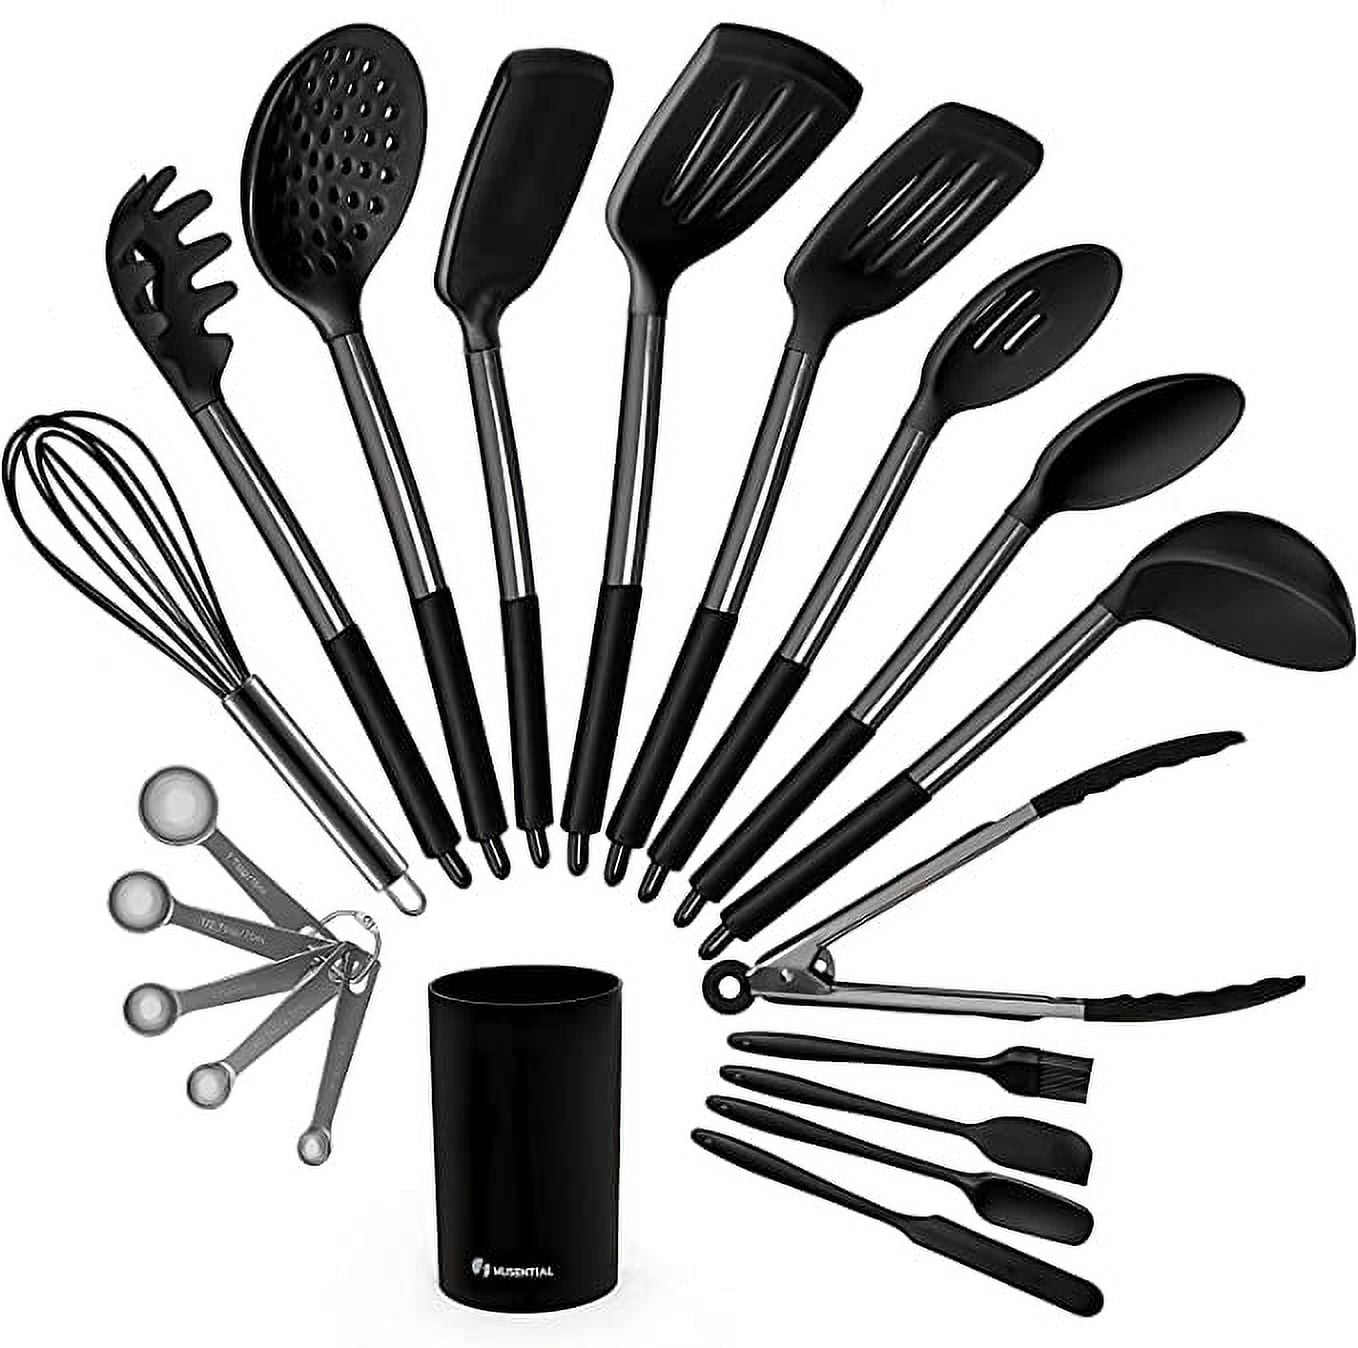 Complete kitchen Utensils Set 19pcs, Made with Premium Silicone & Wood, all  in one kitchen accessori…See more Complete kitchen Utensils Set 19pcs